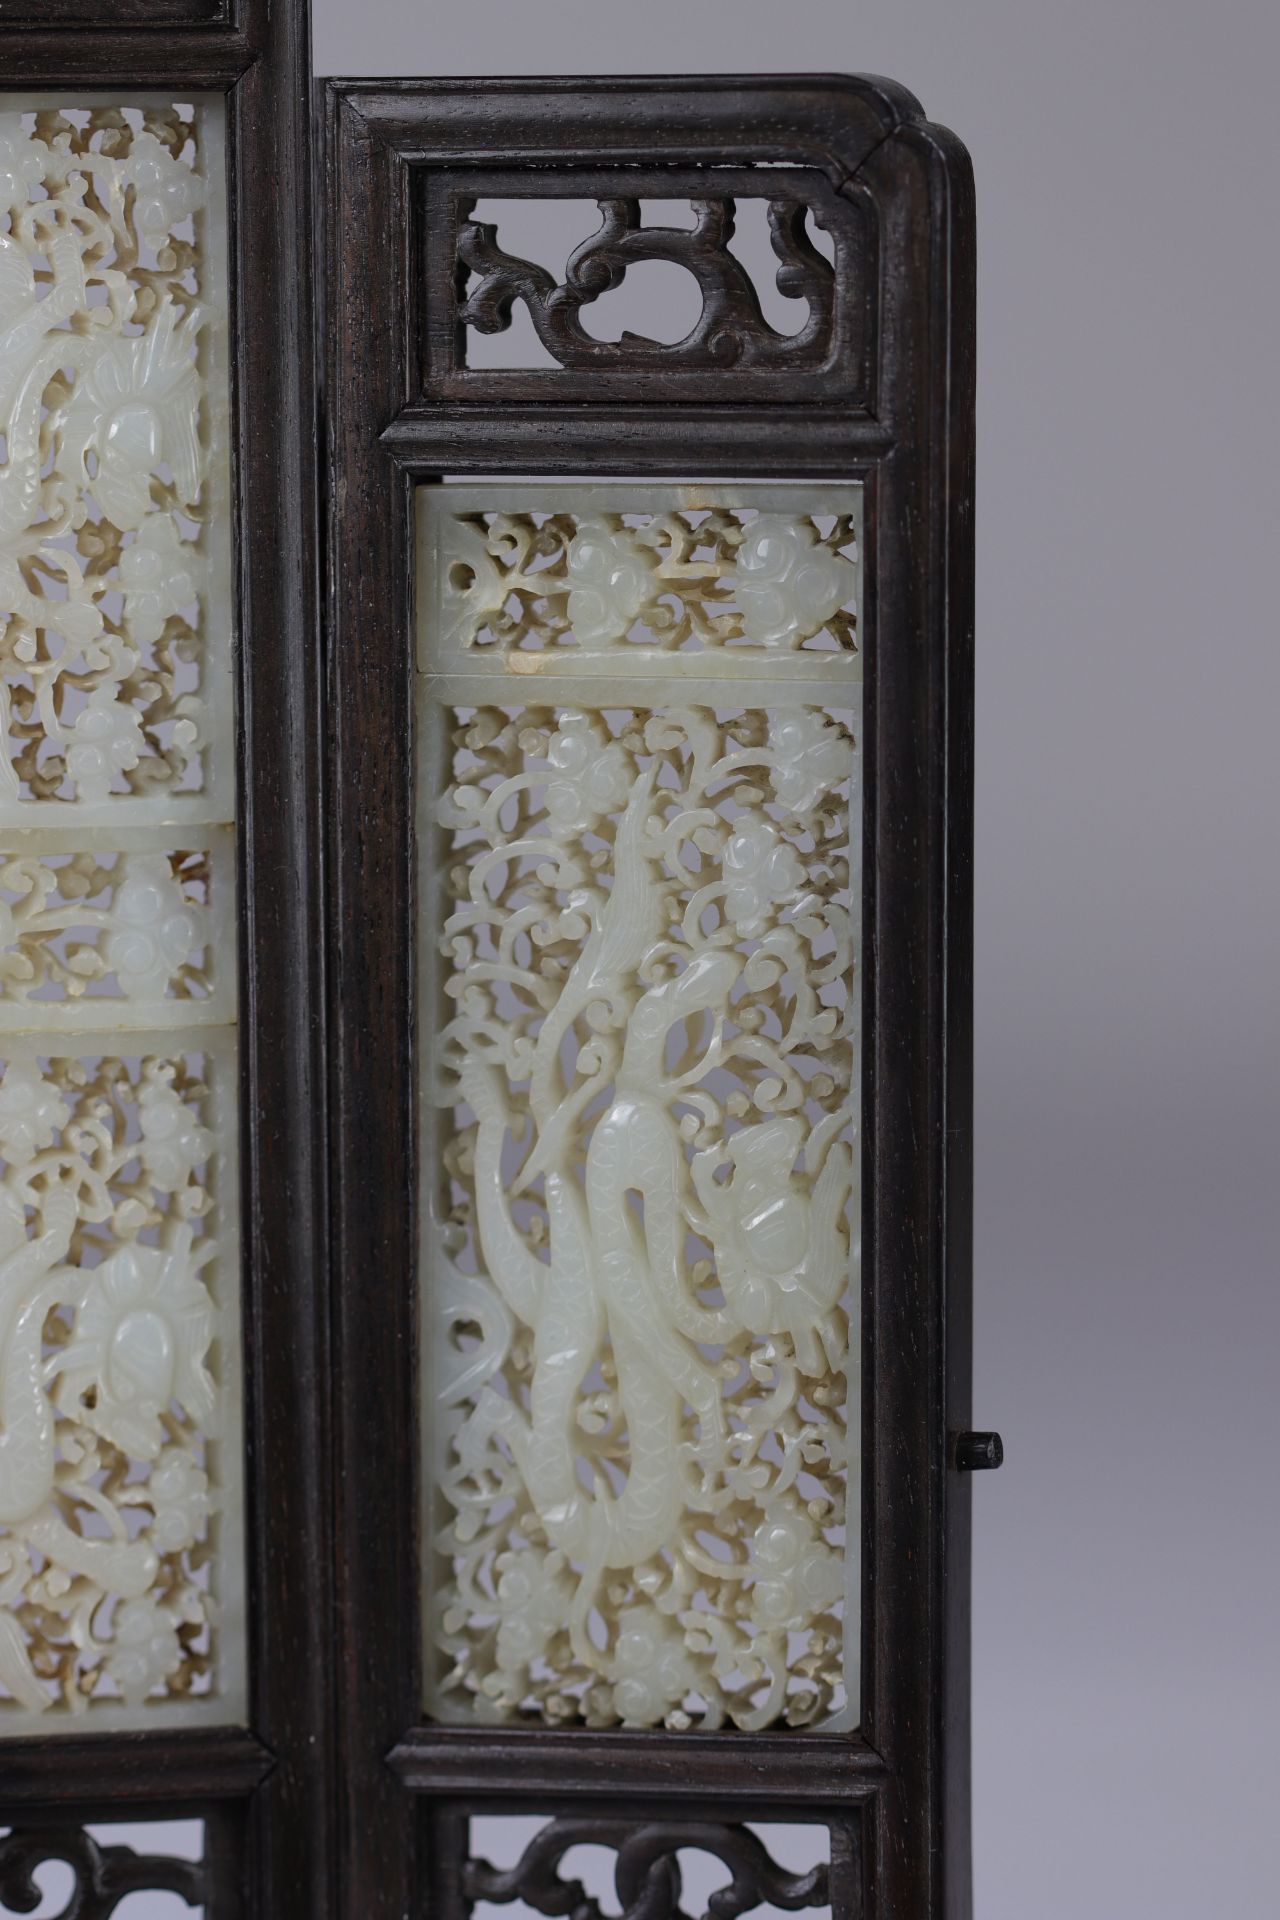 Jade triptych table screen decorated with dragons Qing period - Image 4 of 5